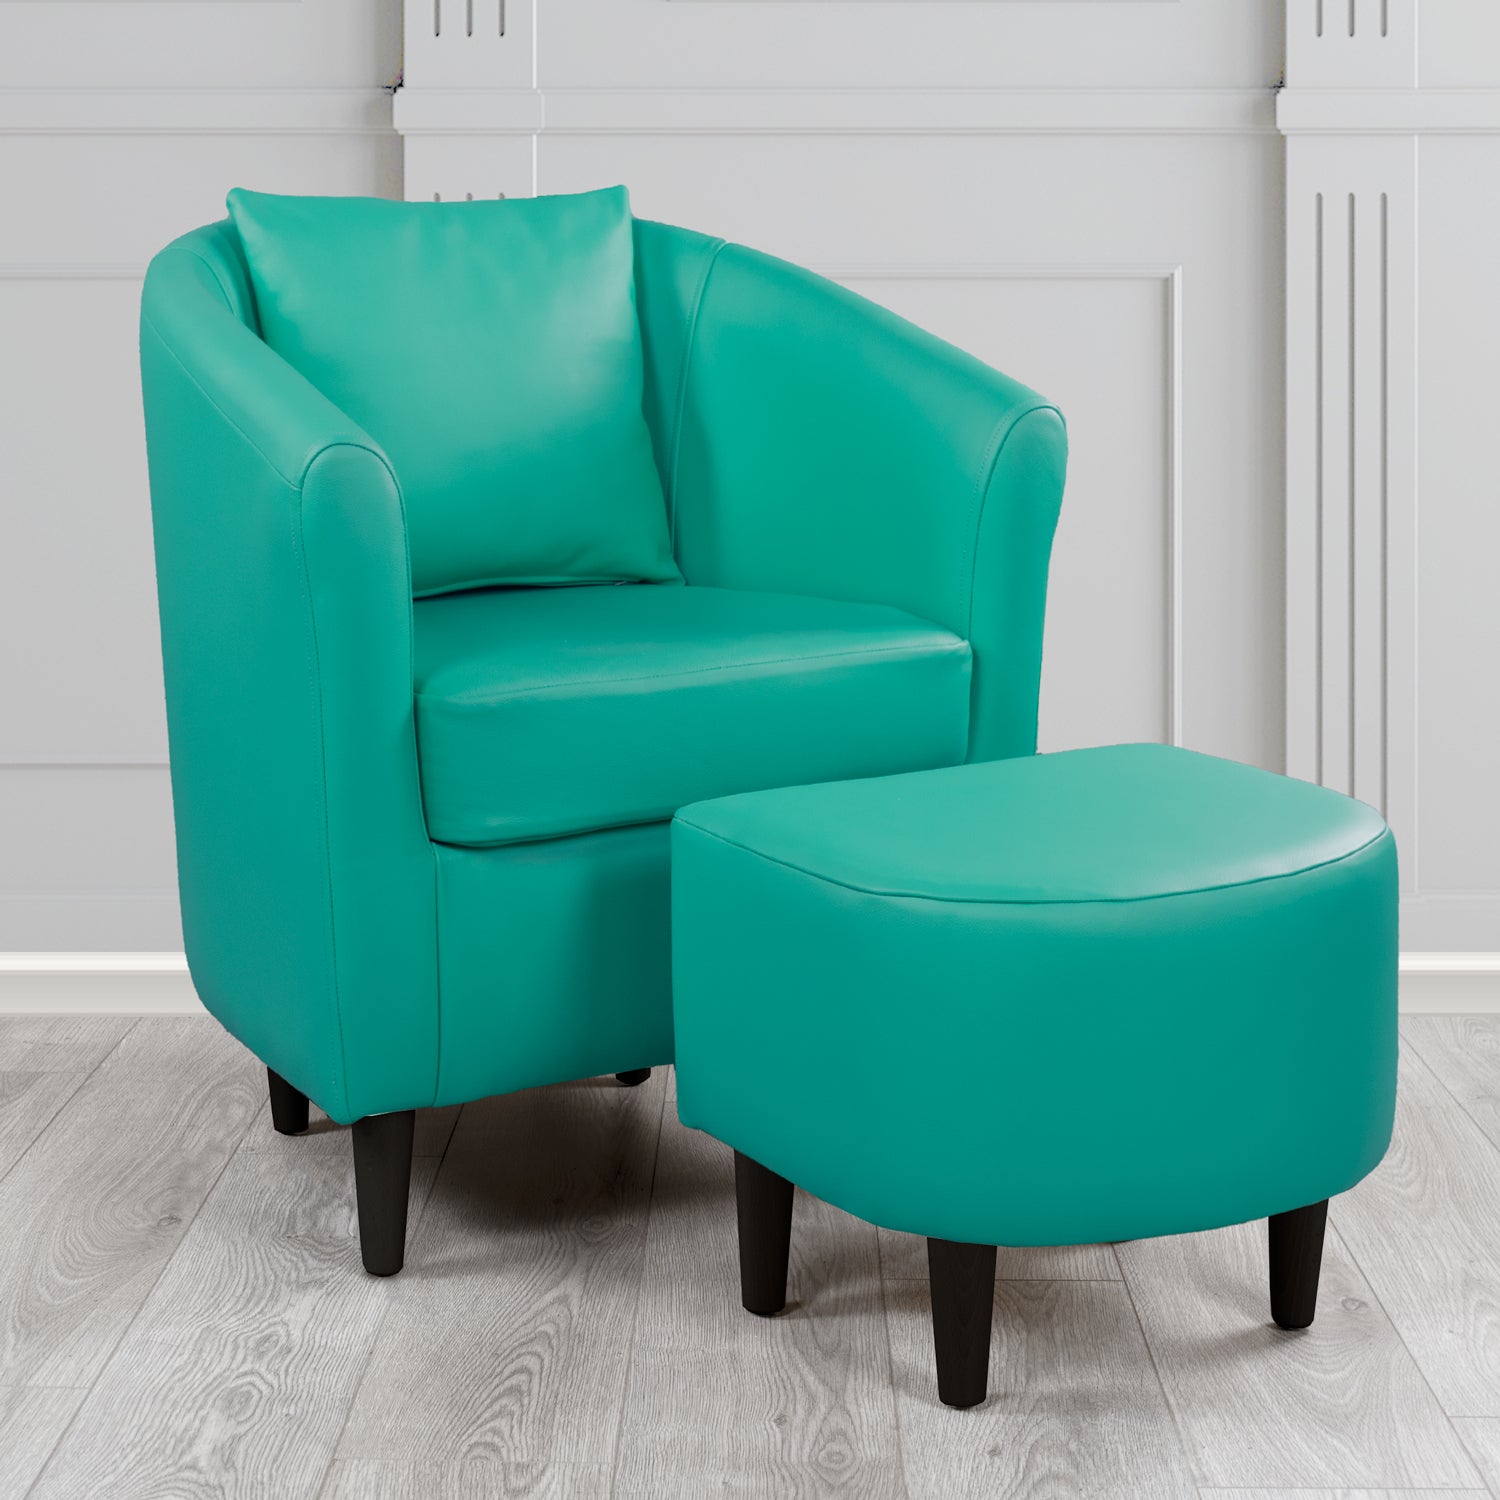 St Tropez Shelly Dark Teal Crib 5 Genuine Leather Tub Chair & Footstool Set With Scatter Cushion (6619475836970)